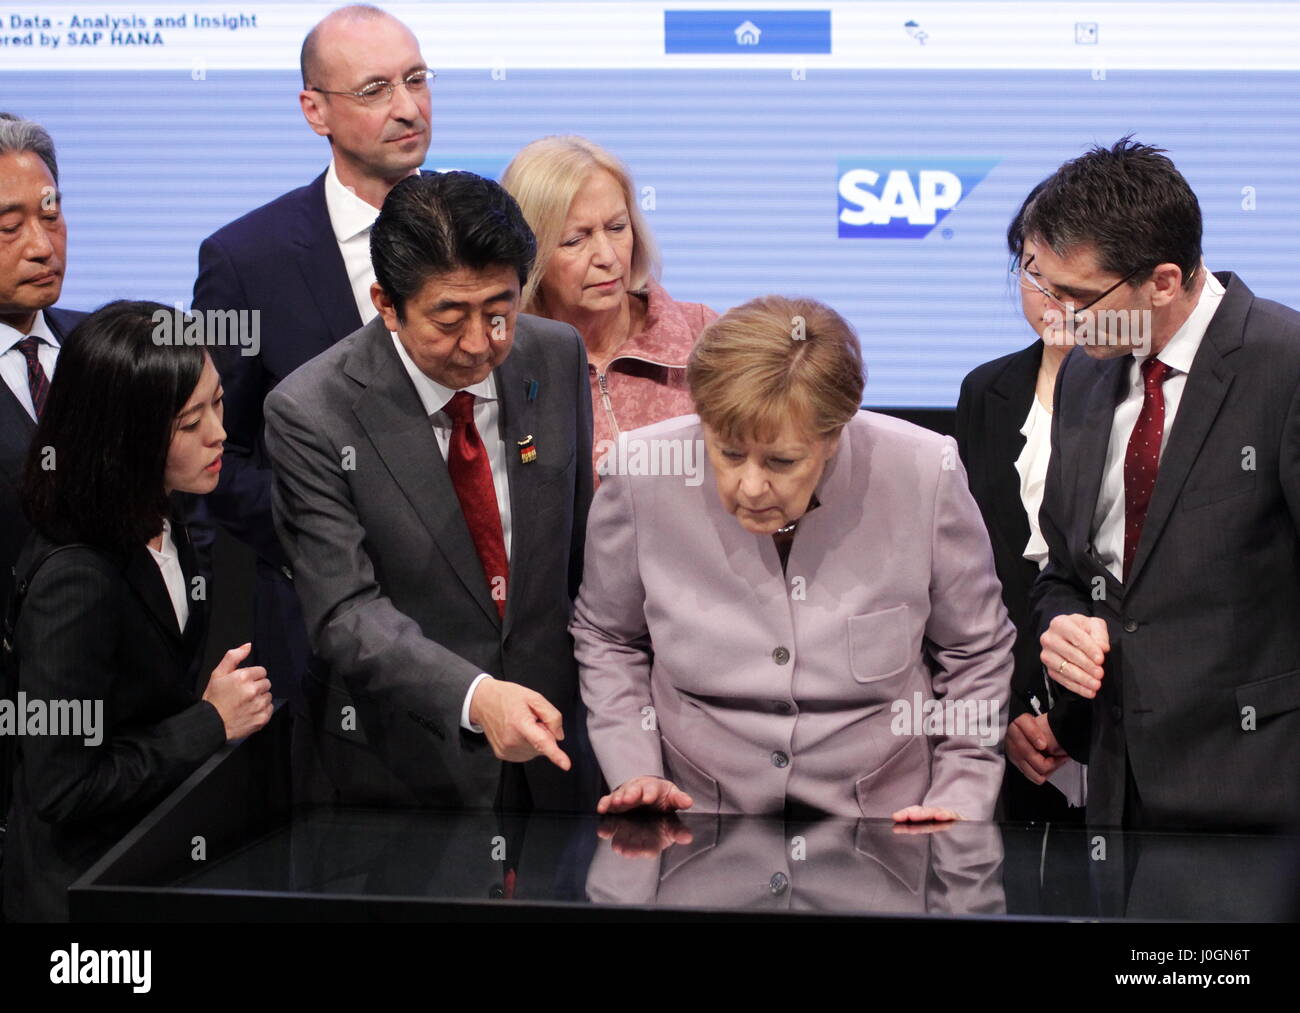 Hanover, Germany. 20th March, 2017. Shinzo Abe (Prime Minister of Japan) and Angela Merkel (Federal Cancellor of Germany) meet Bernd Leukert (right, Executive Board SAP SE, Products and Innovations) at SAP's exhibition stand, CeBIT-opening walk, CeBIT 2017, ICT trade fair, lead theme 'd!conomy - no limits'. Photocredit: Christian Lademann Stock Photo